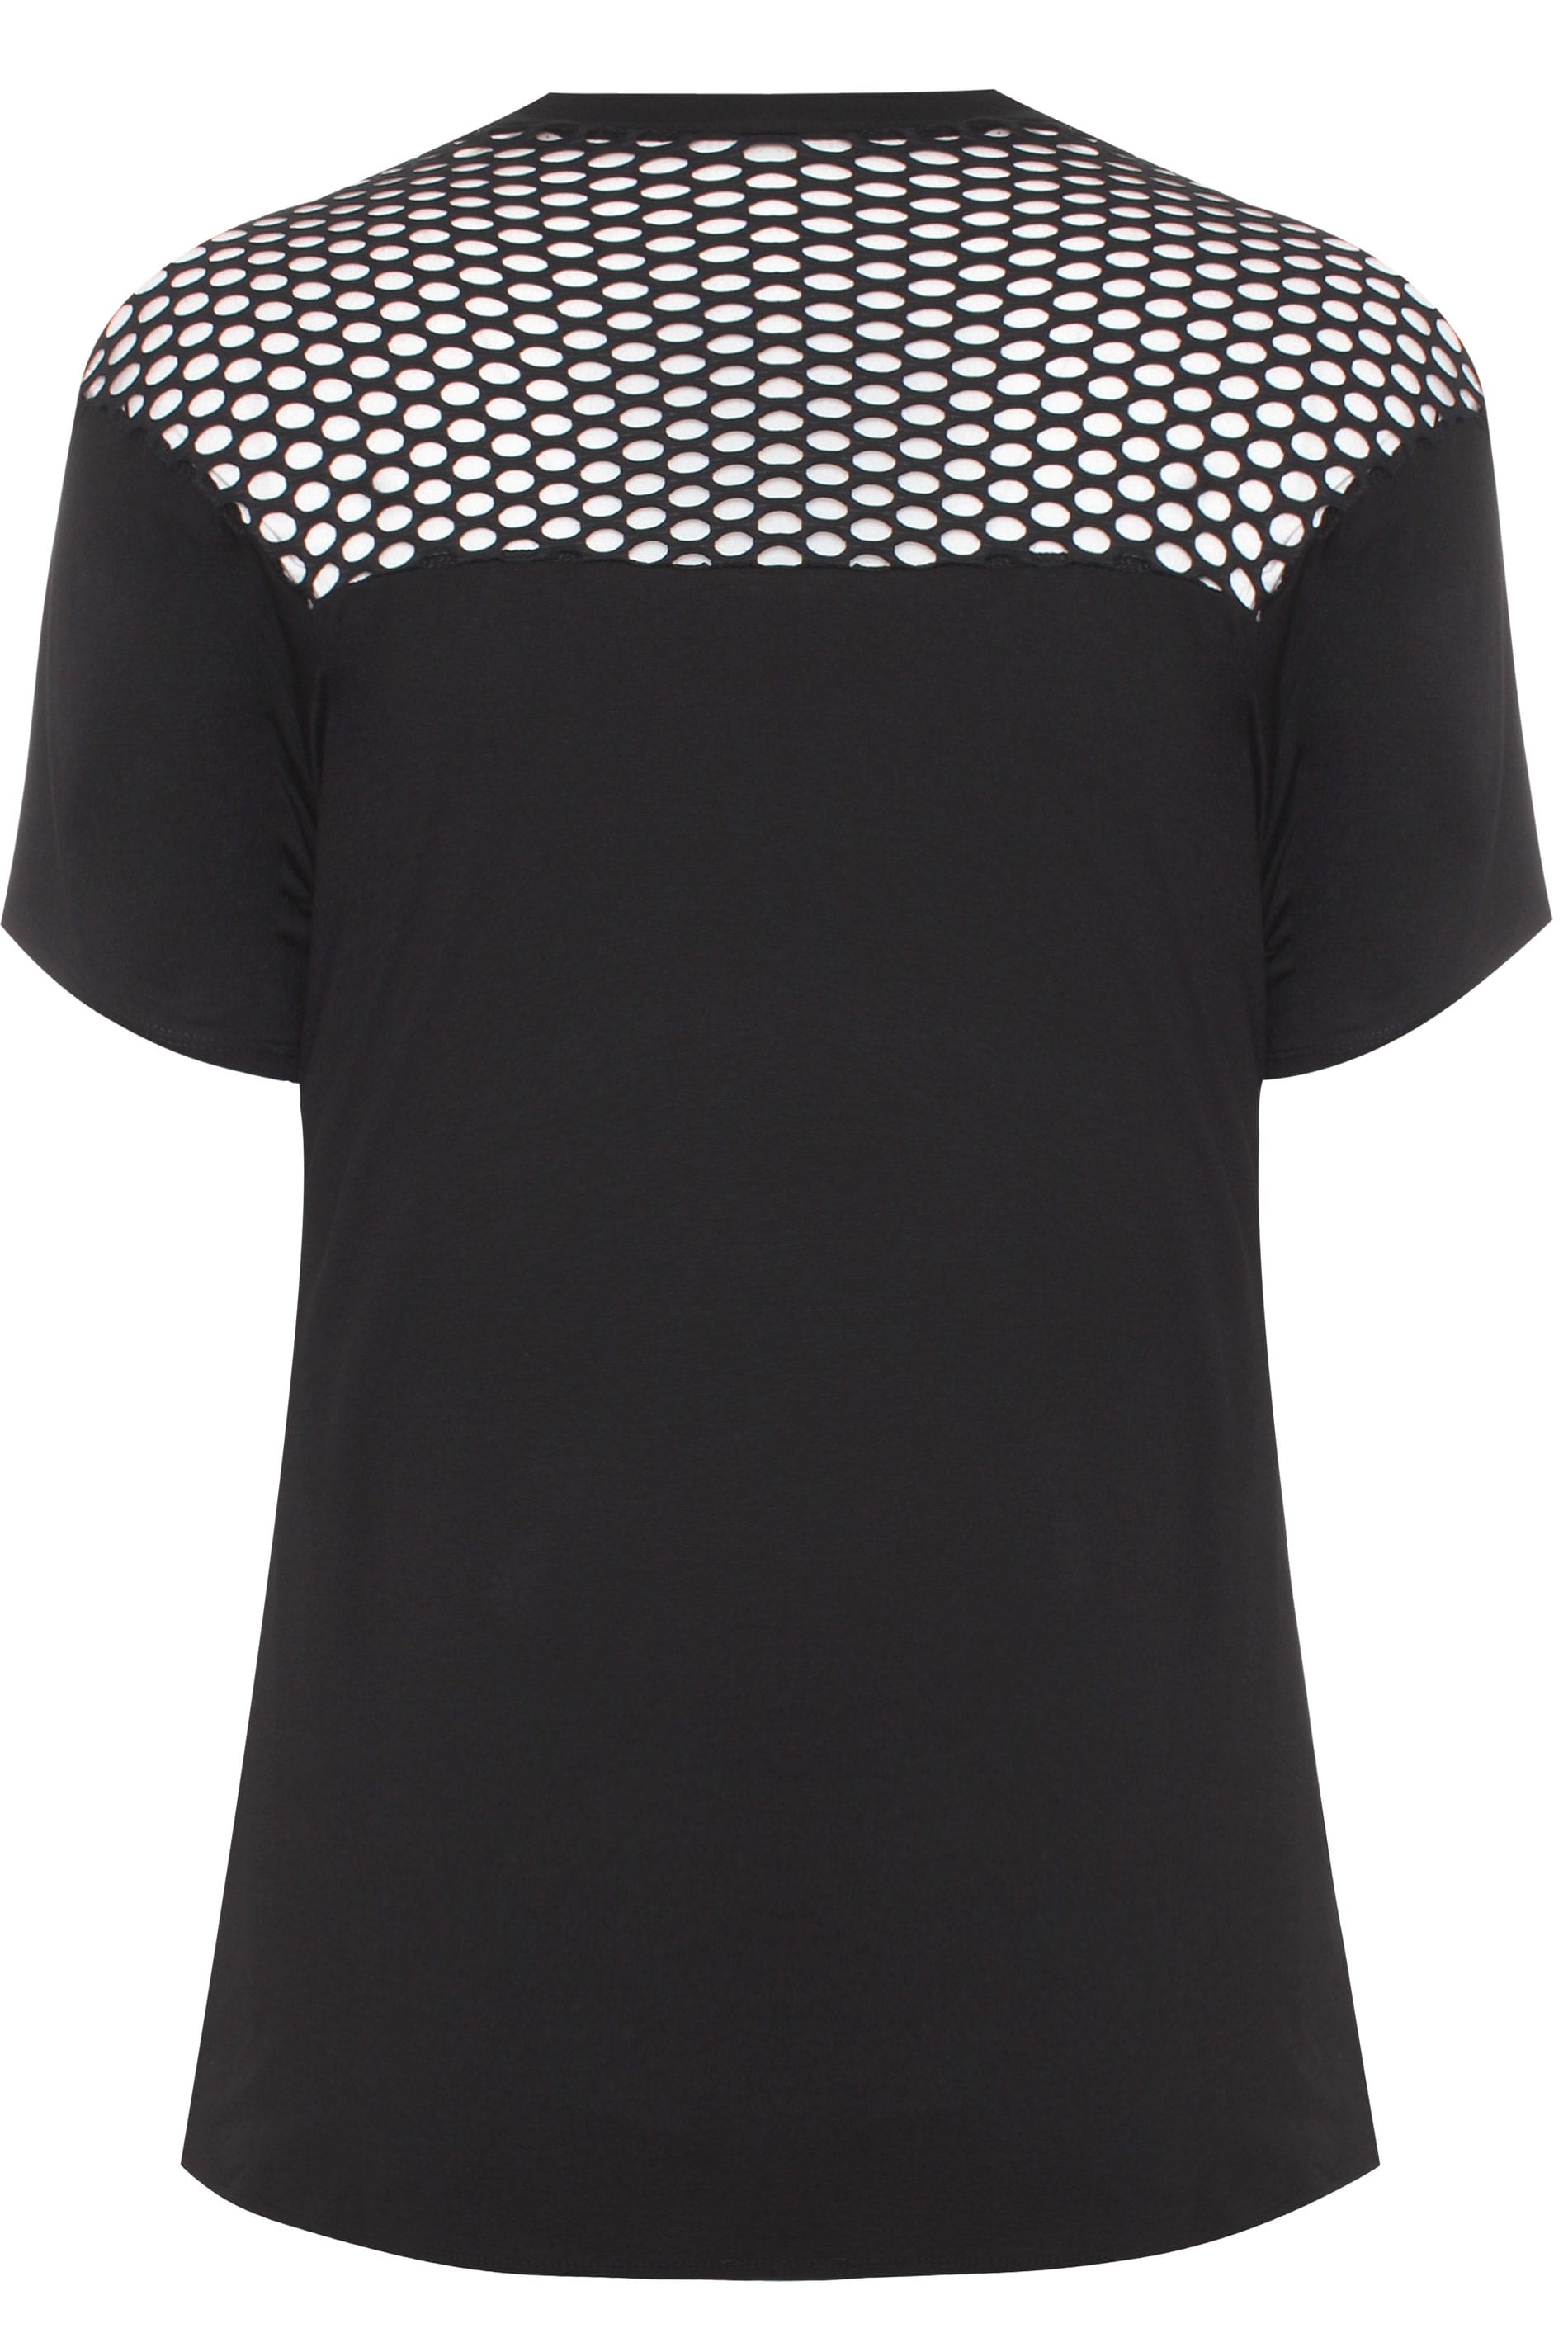 LIMITED COLLECTION Black Fishnet Insert Top | Yours Clothing